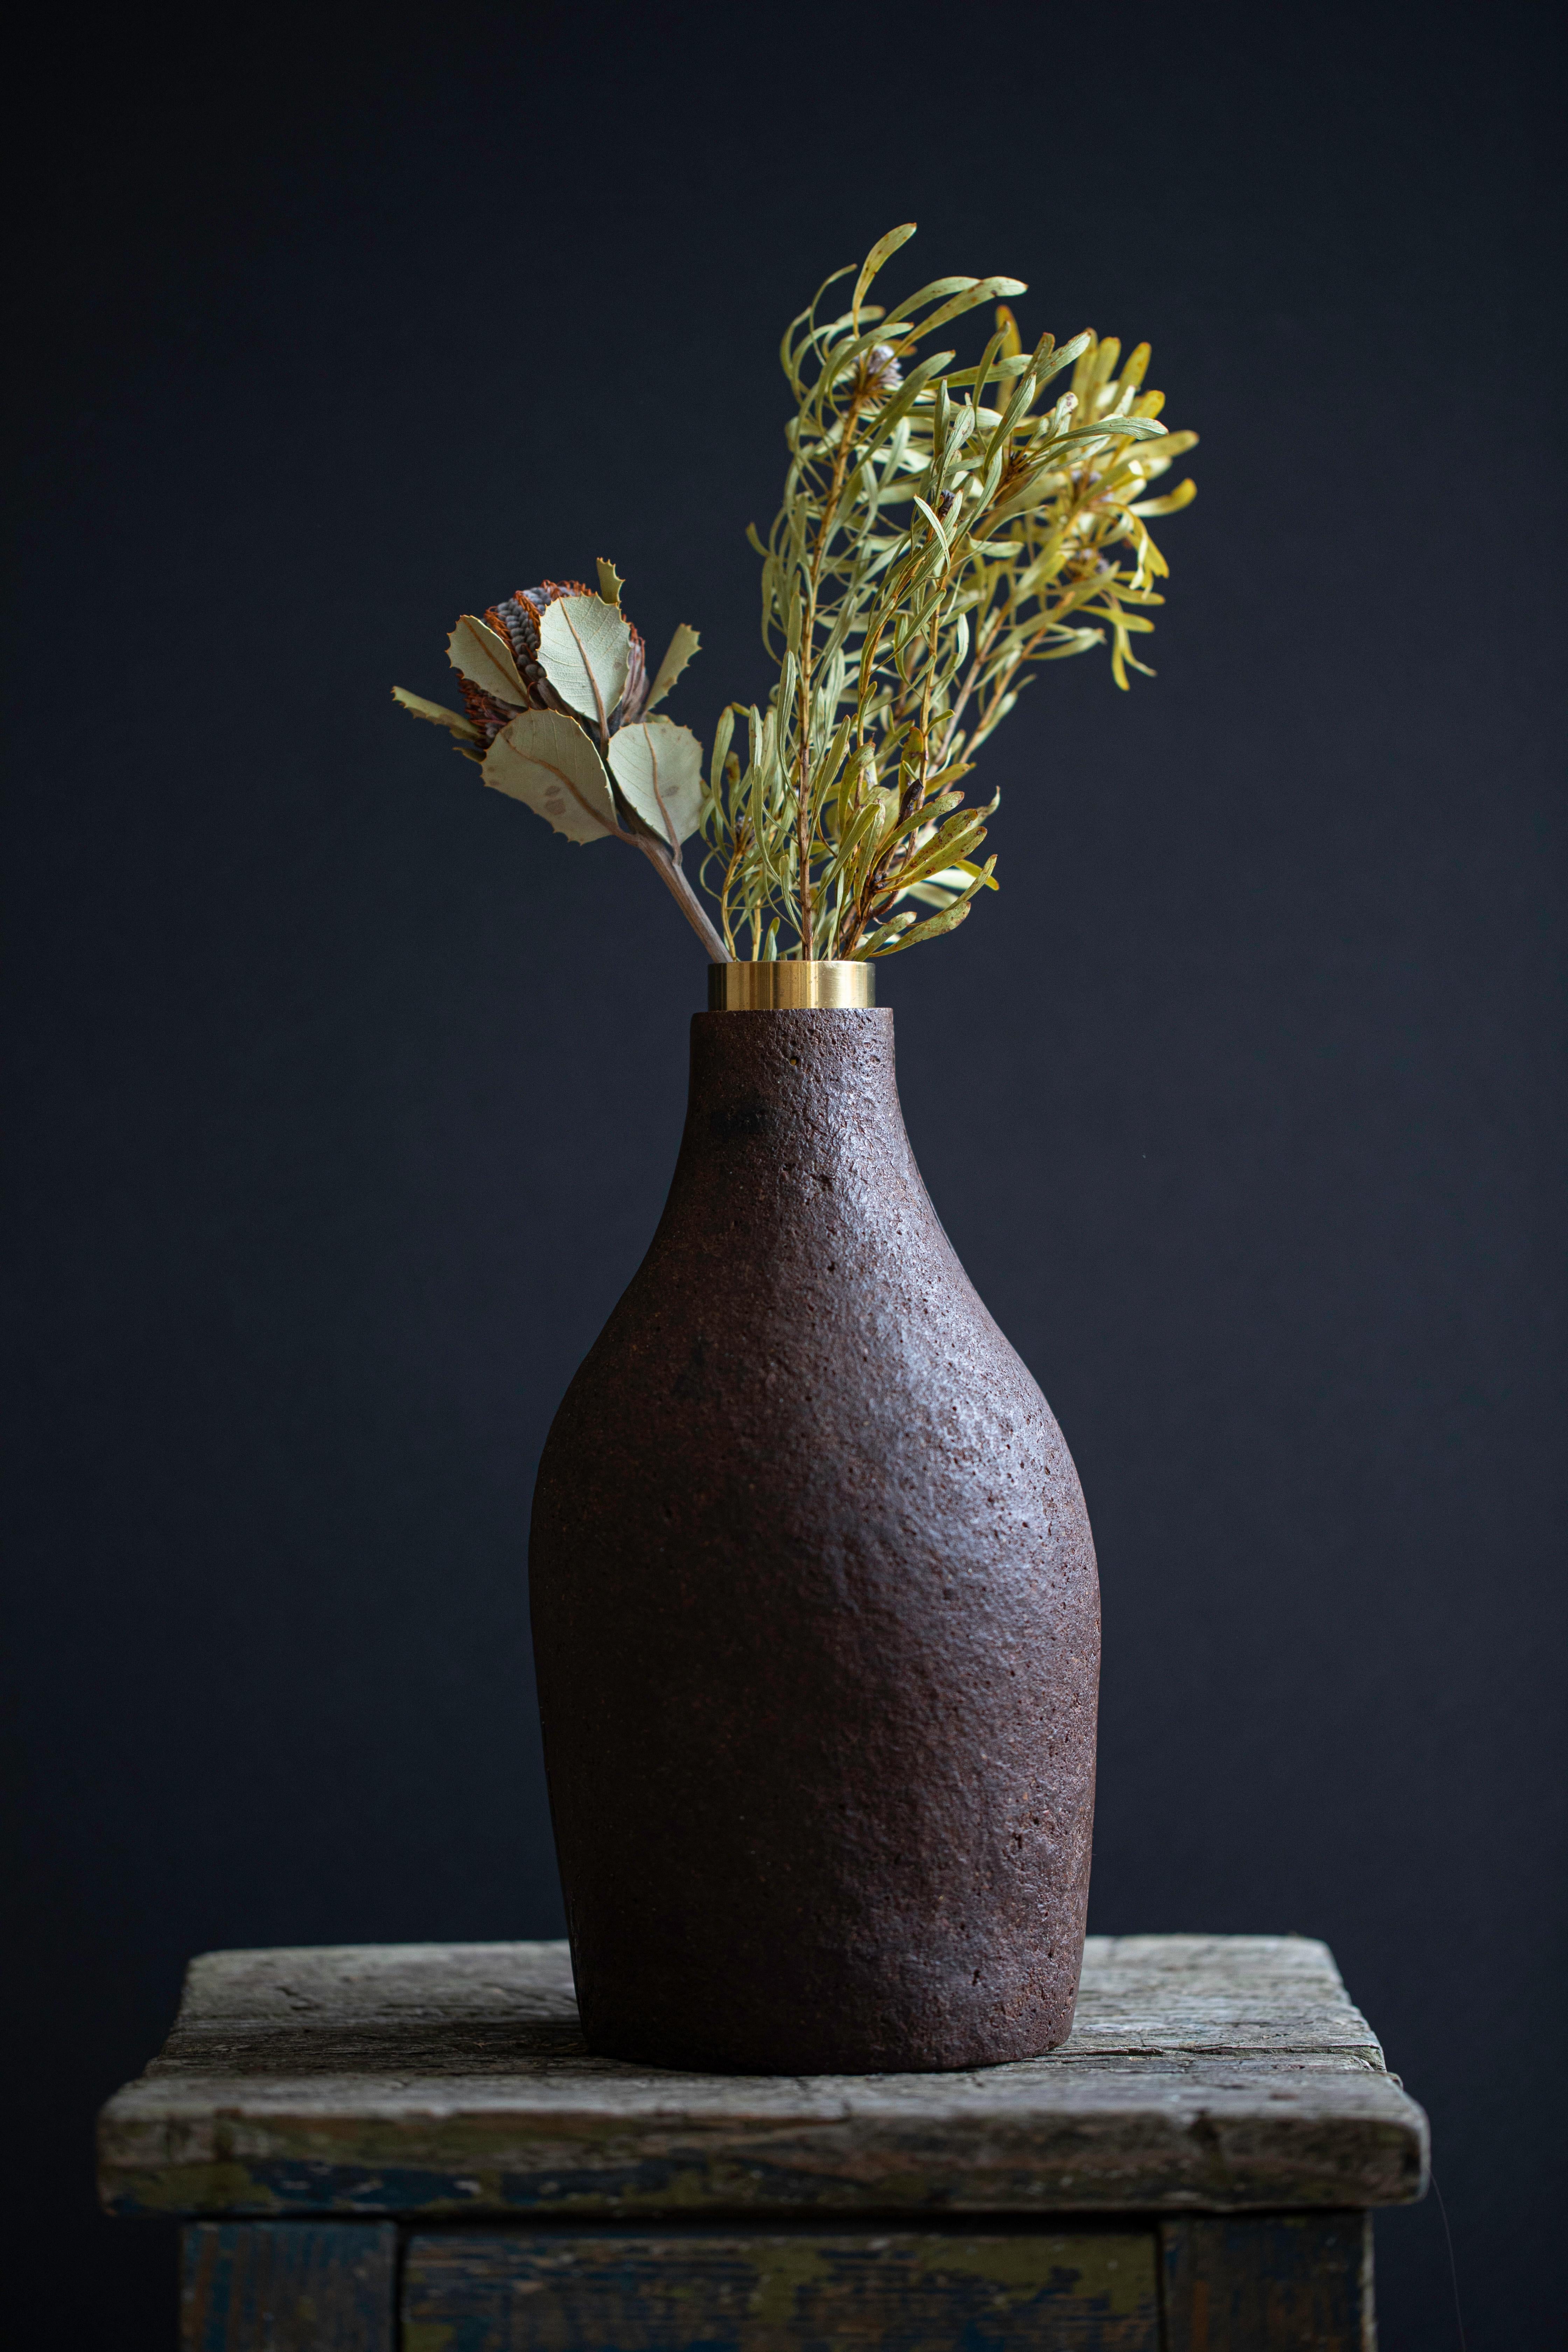 Vase by Evelina Kudabaite Studio
Handmade
Materials: oak, brass
Dimensions: H 260 mm x D 120 mm
Colour: dark brown
Notes: for indoor use

Since 2015, product designer Evelina Kudabaite keeps on developing and making GIRIA objects. Designer